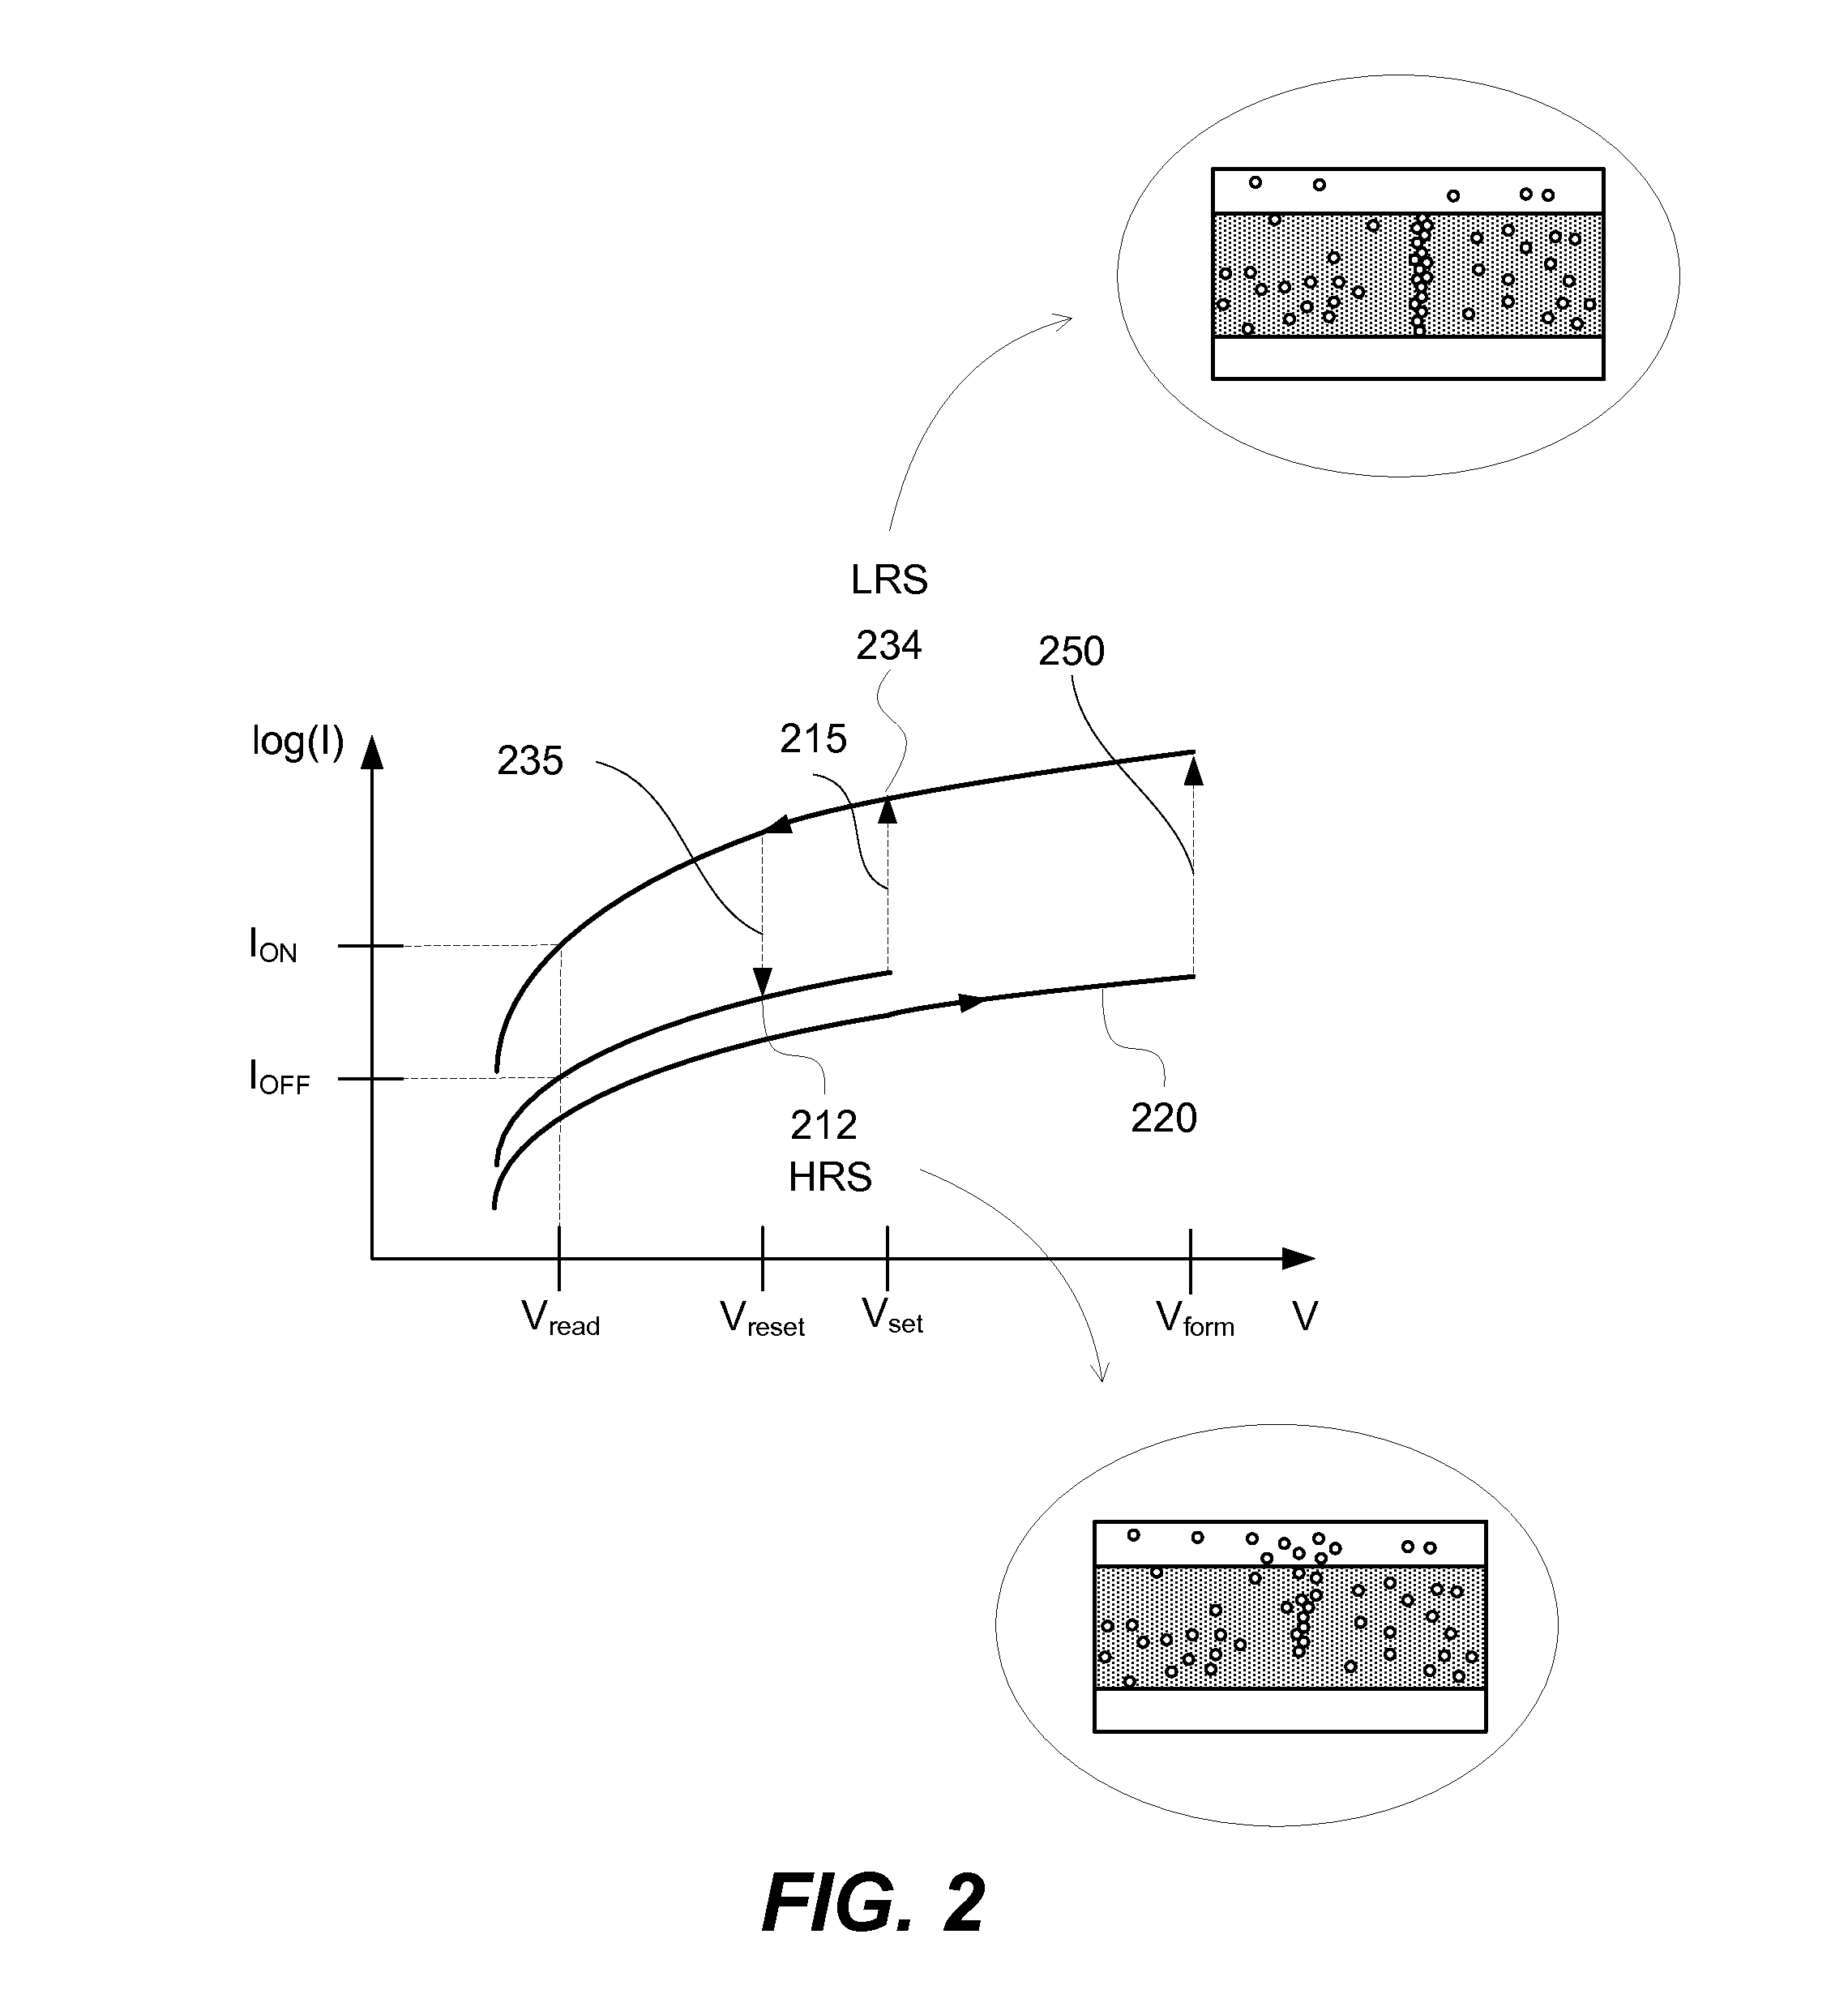 Method for Improving Data Retention of ReRAM Chips Operating at Low Operating Temperatures